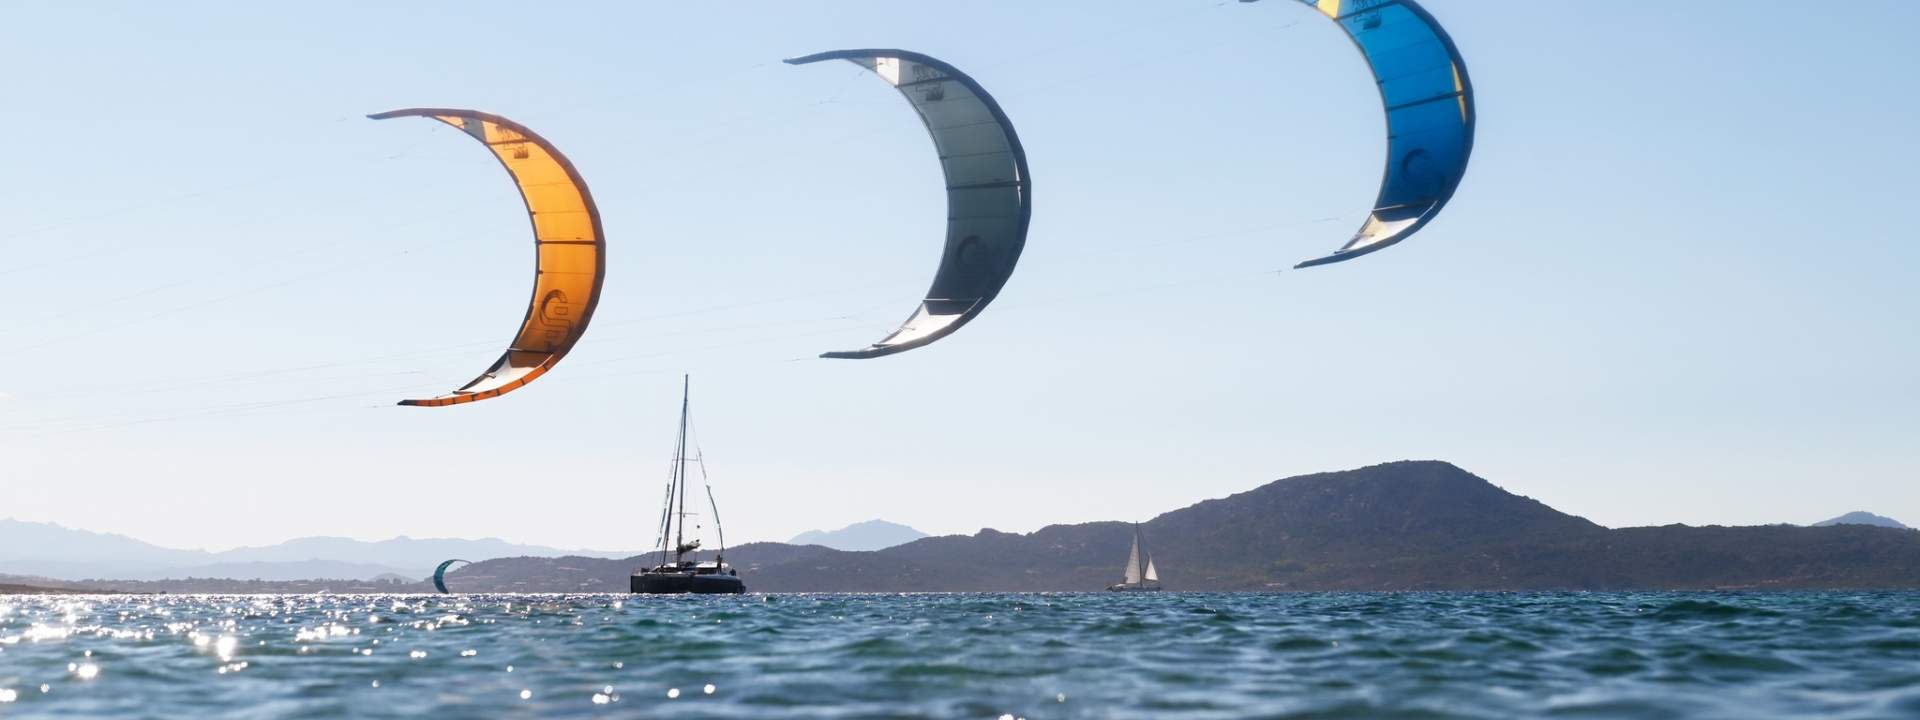 Explore Sardinia and discover the best kitesurfing spots!